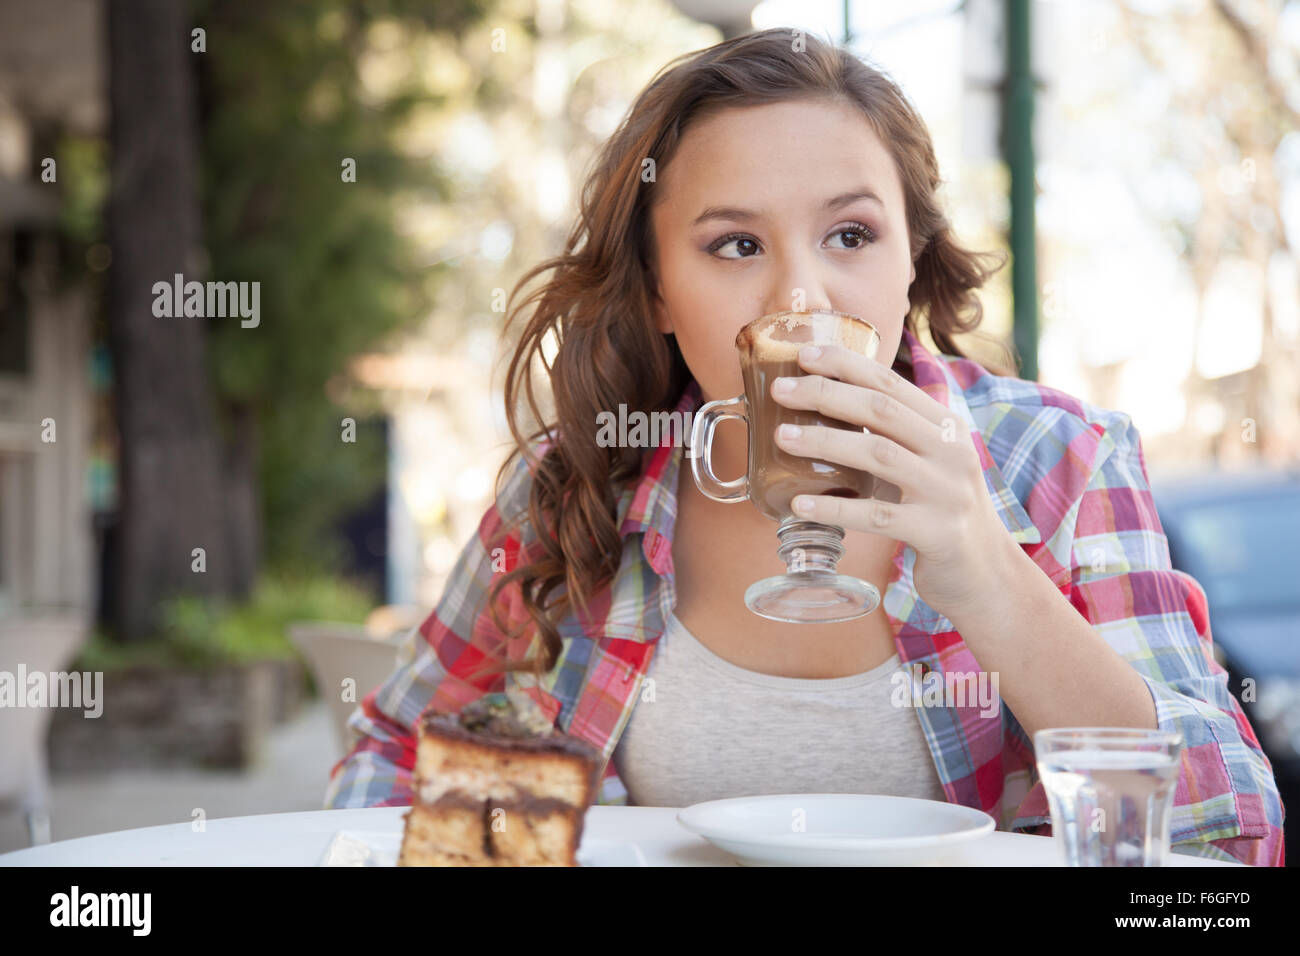 Girl drinking a cup of coffee Stock Photo